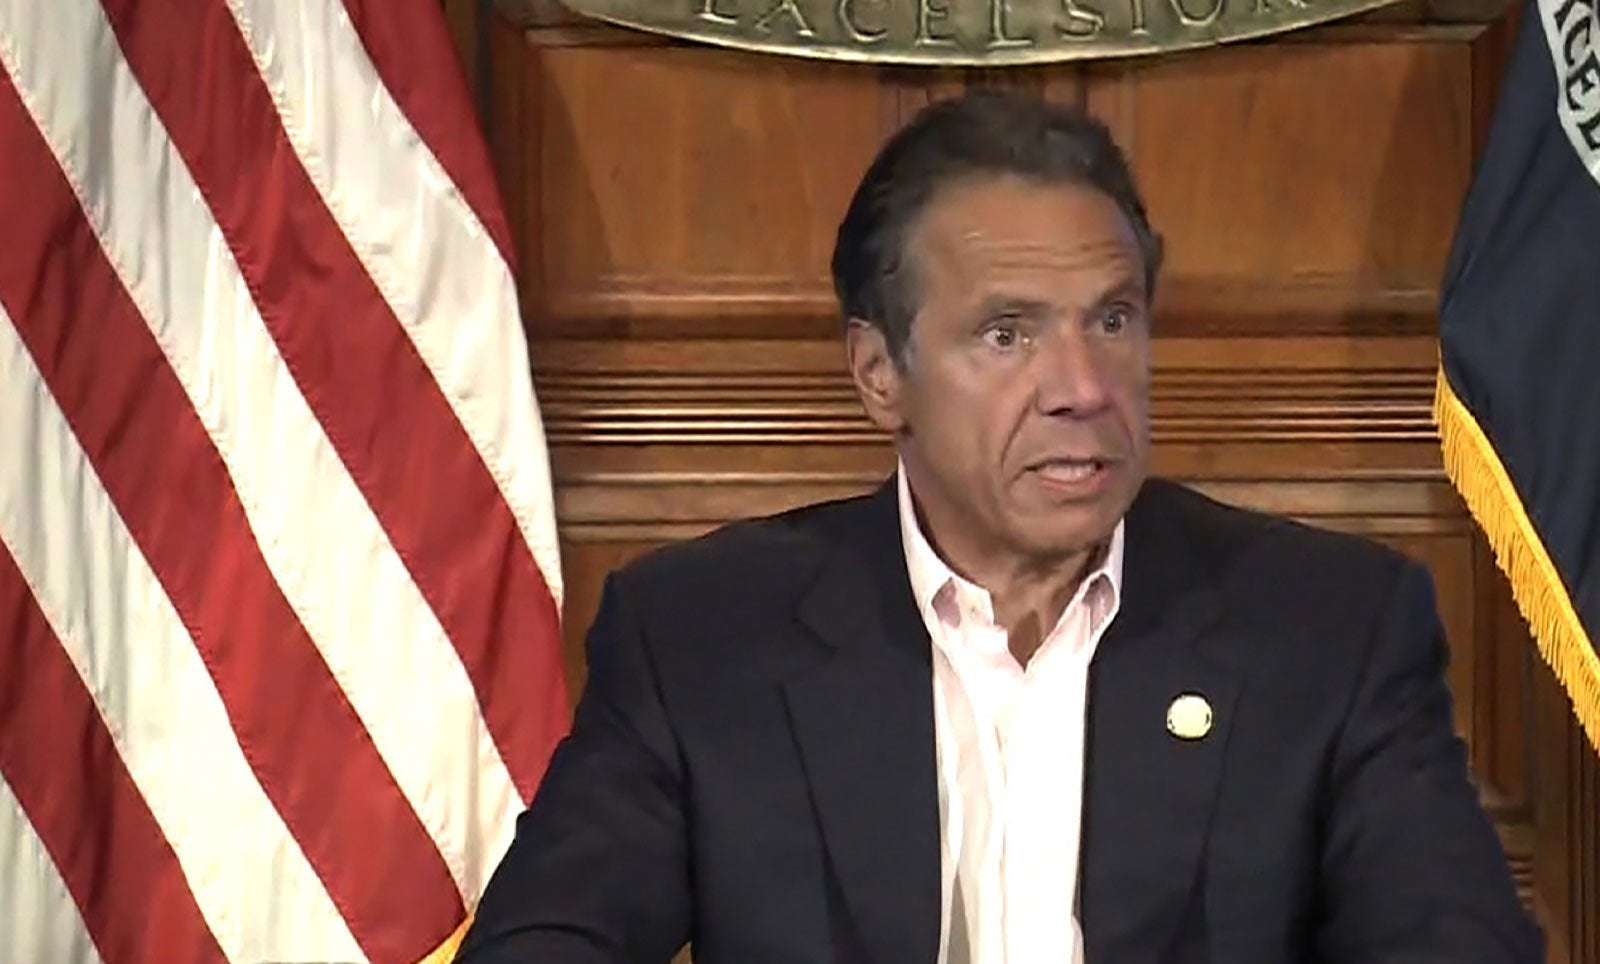 image for New York governor says failing to wear a mask is "disrespectful" to essential workers "who gave their life"